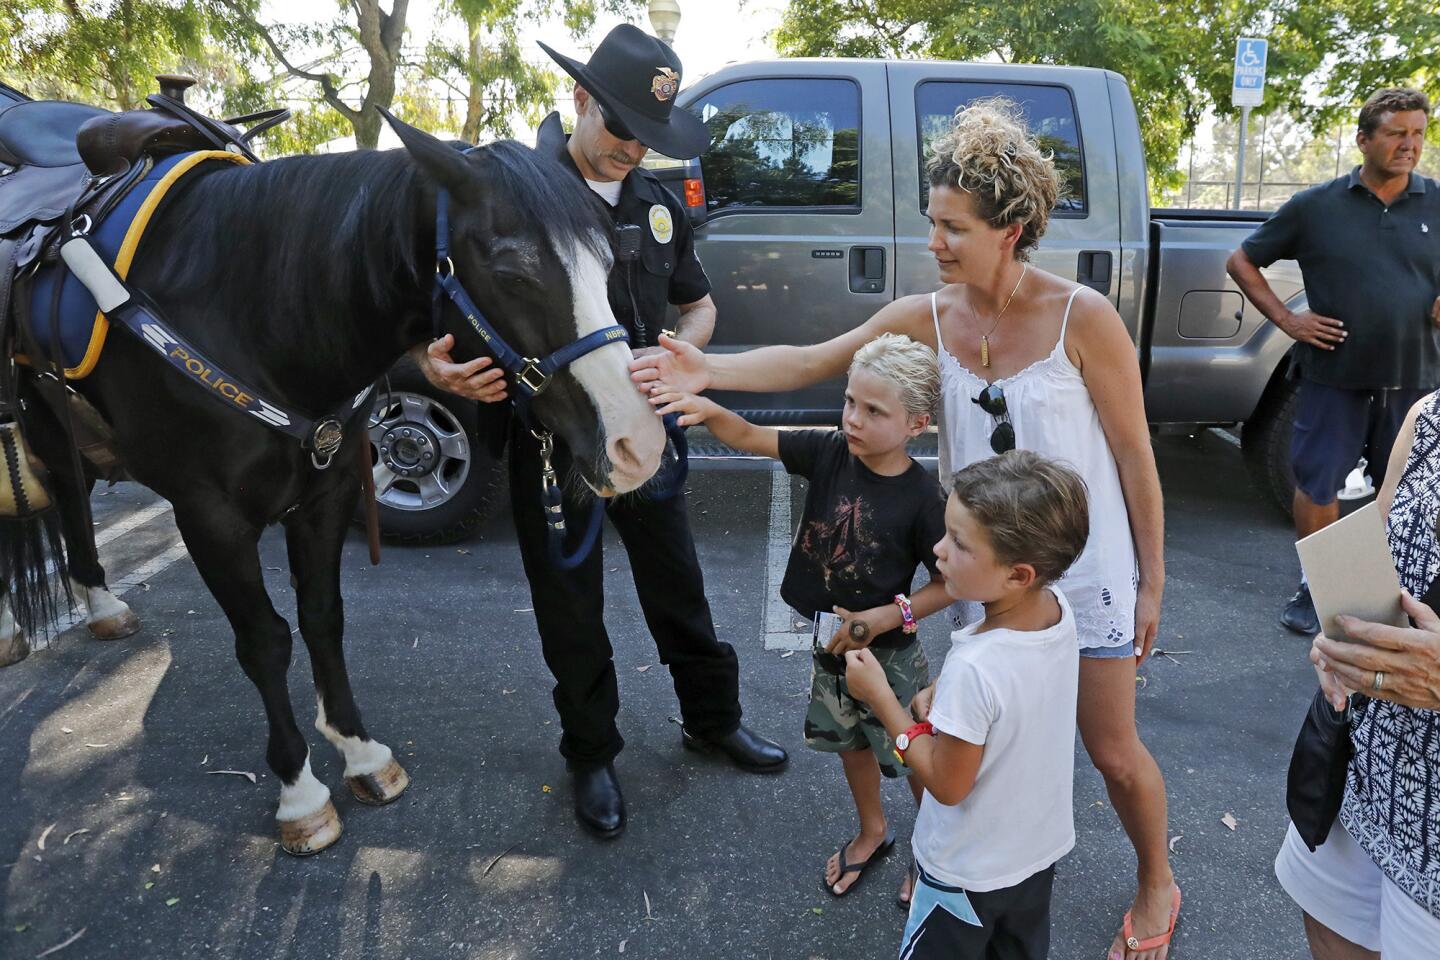 Christie Ferentz and her sons Dylan, 6, bottom left, and Tyler, 4, meet police Officer Matthew Graham and his horse, Stogie, during a Newport Beach public safety fair in celebration of National Night Out on Tuesday at Bonita Canyon Sports Park.